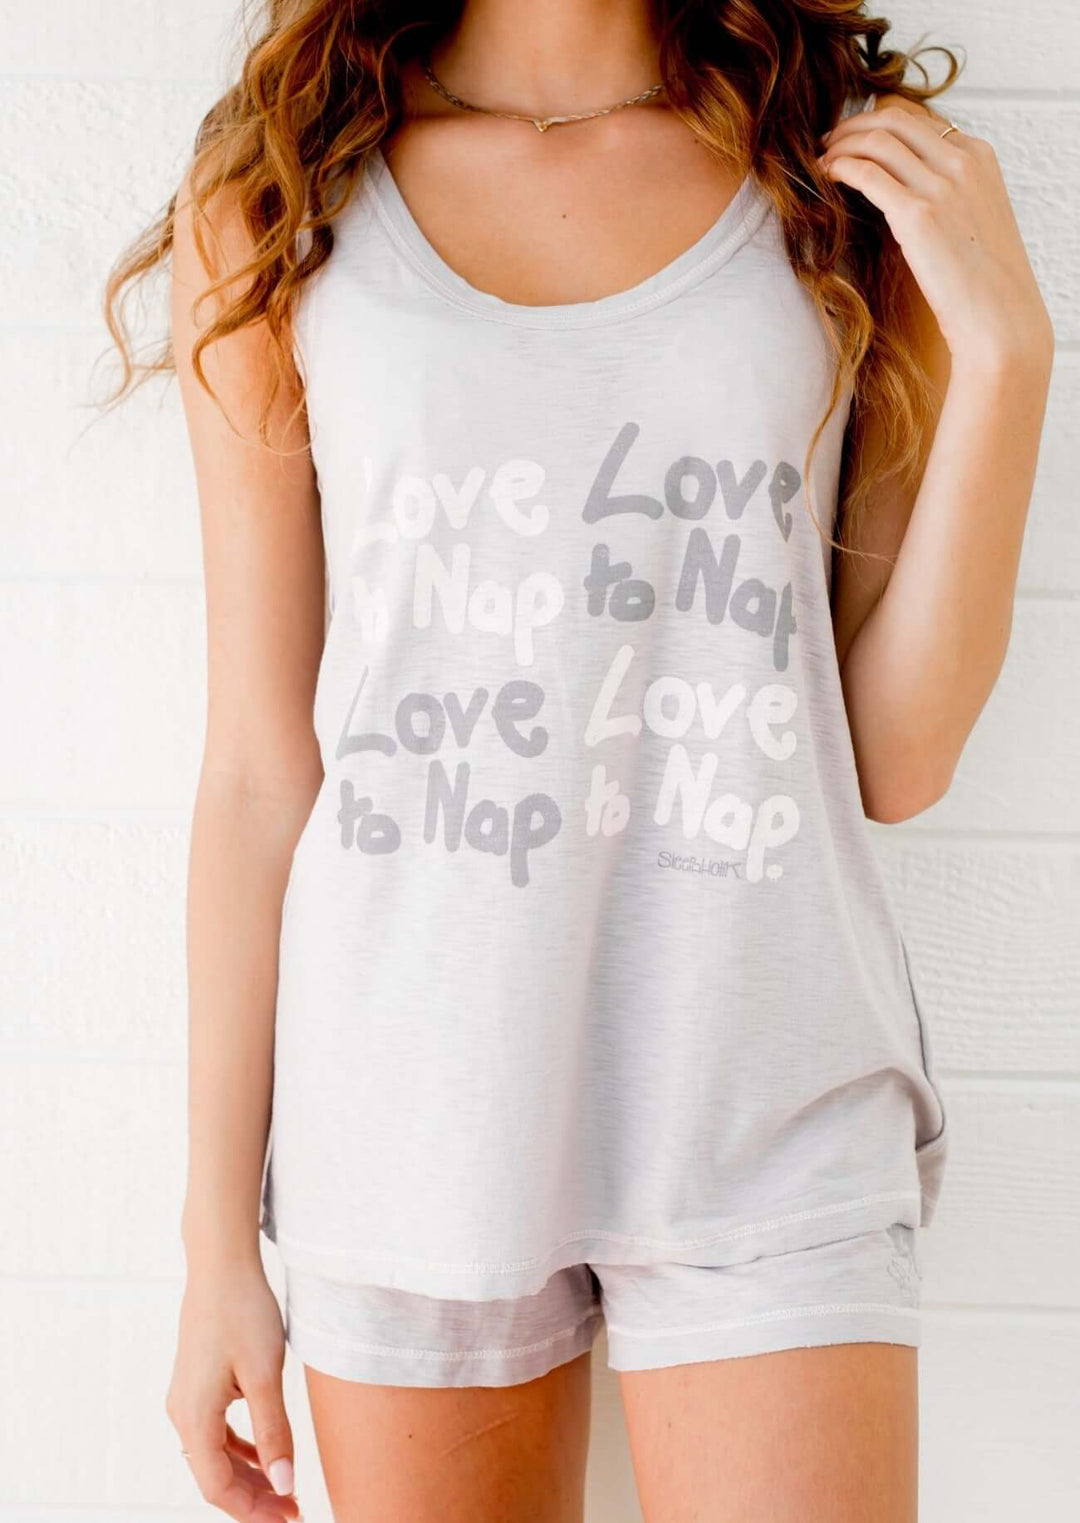 Sleepaholik "Love to Nap" Graphic Ladies Lounge Tank Top Made in USA with Fabric that is Made in USA! | Classy Cozy Cool Women's Made in America Clothing Boutique